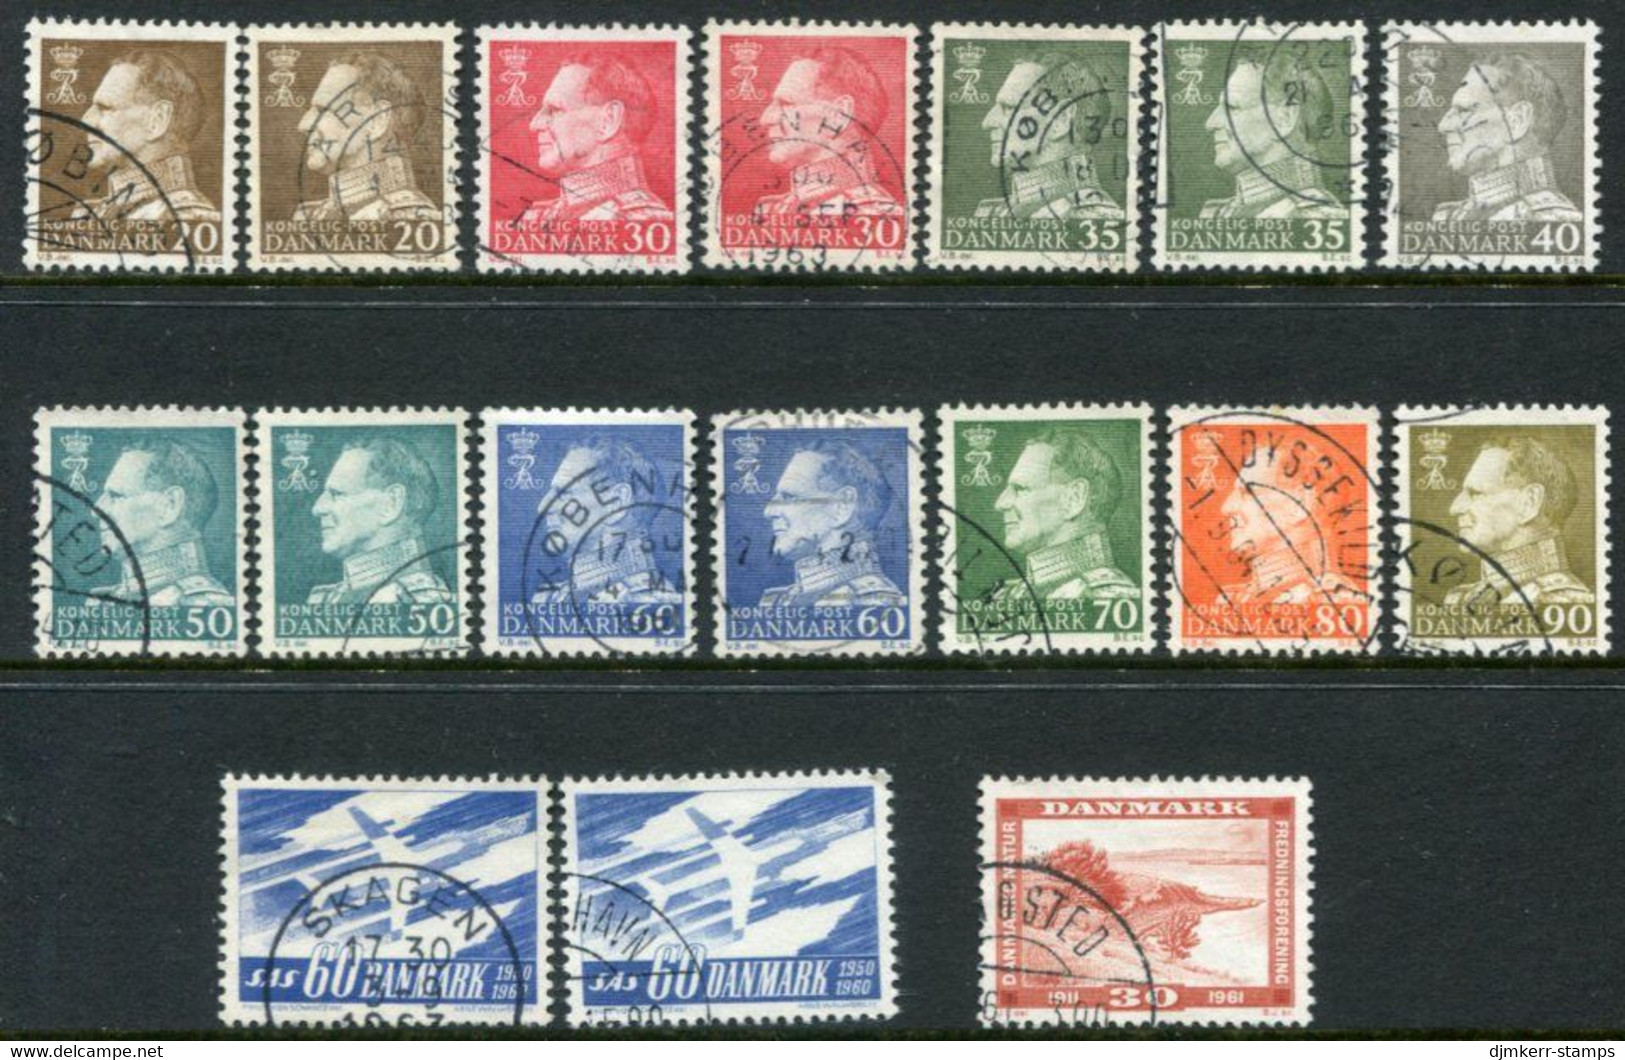 DENMARK 1961 Complete Issues With Ordinary And Fluorescent Papers, Used Michel 388-98 - Gebruikt